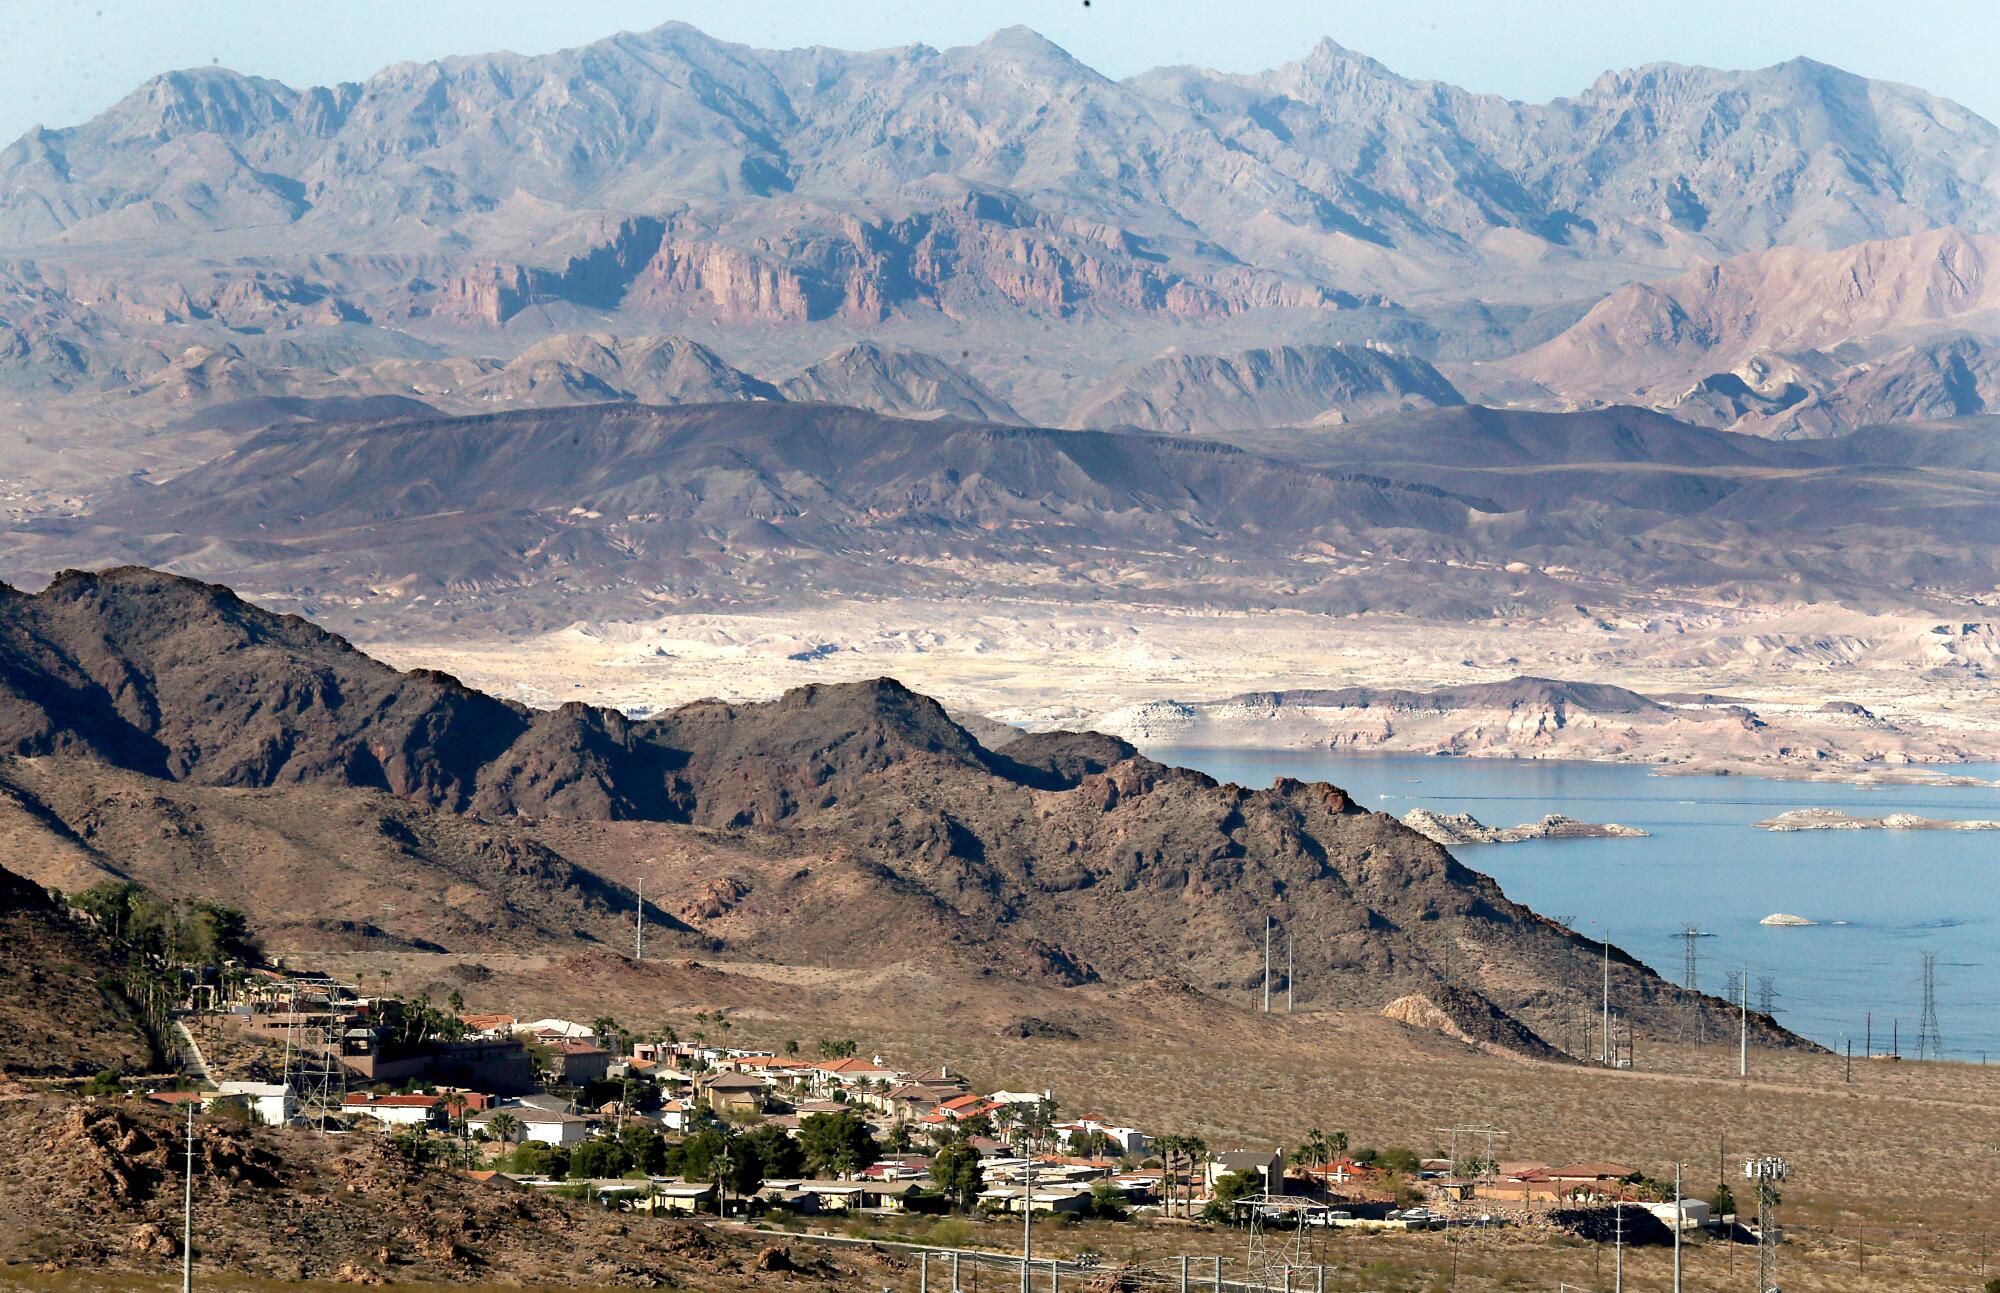 A wide view of residential community by Lake Mead. 